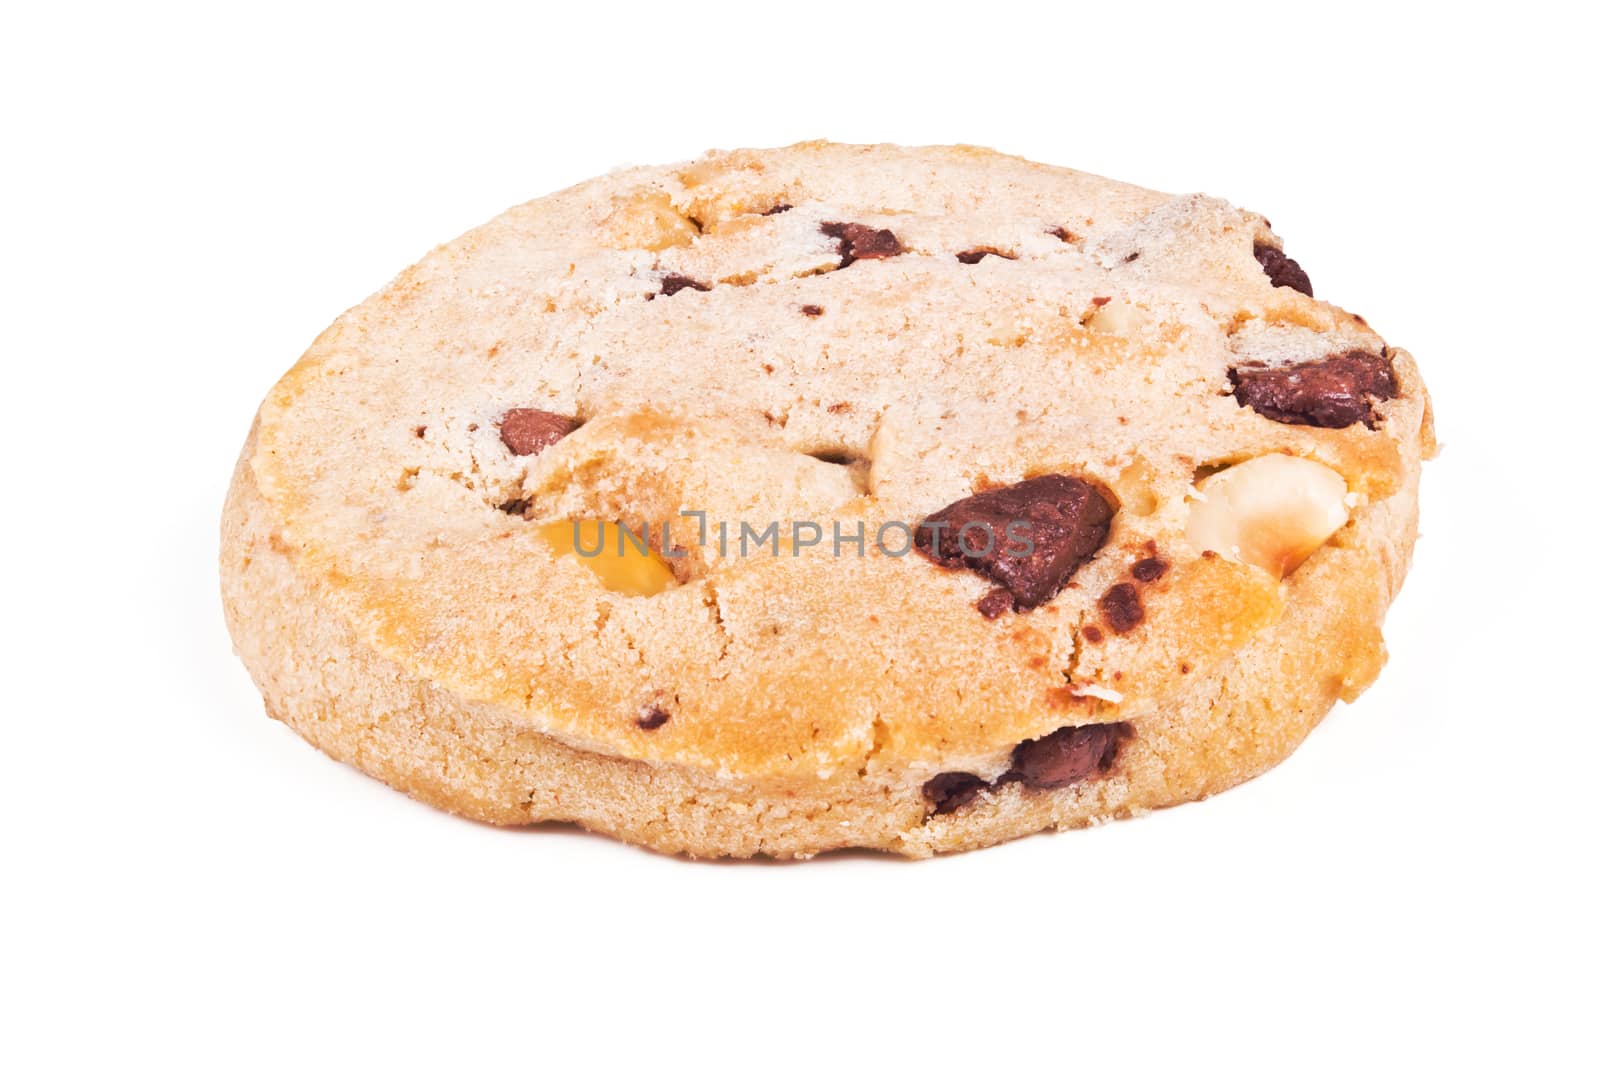 one round shortbread cookies with nuts and chocolate on a white background